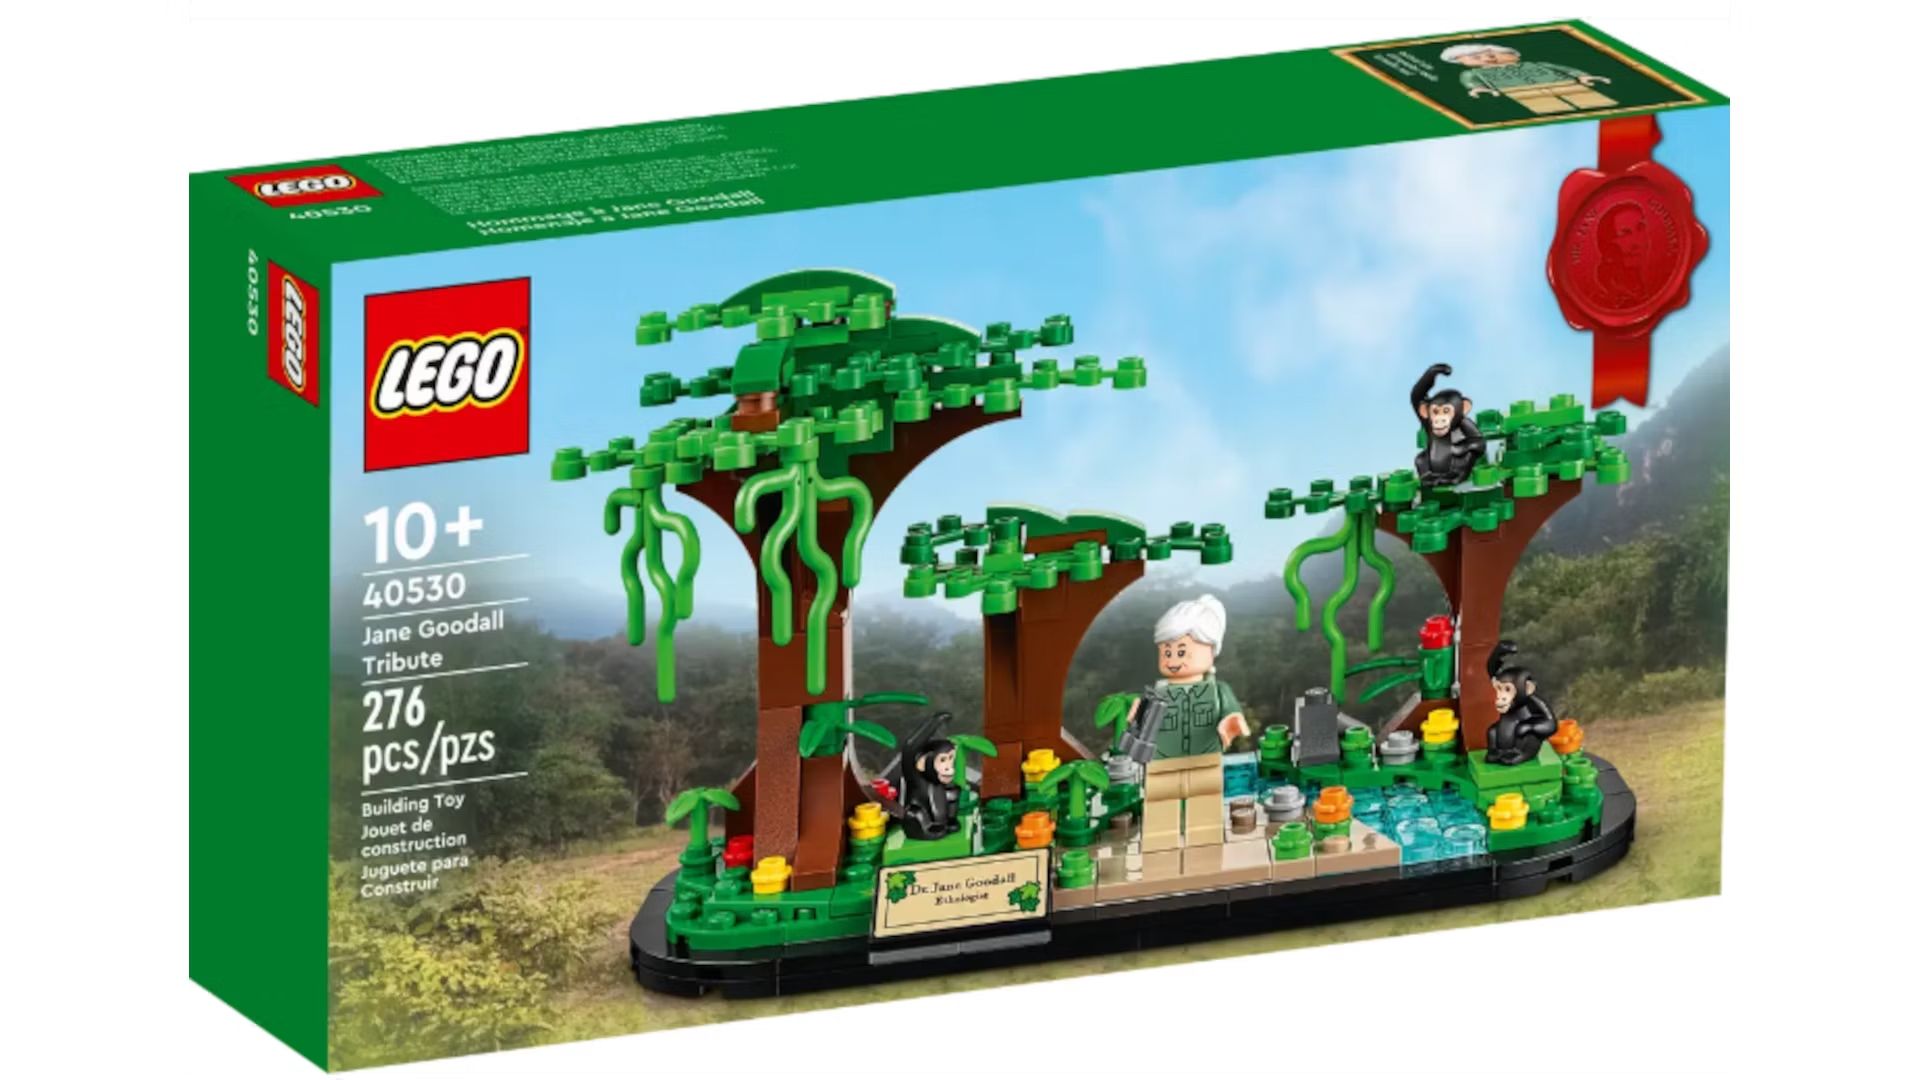 A LEGO box shows the Jane Goodall Tribute set.